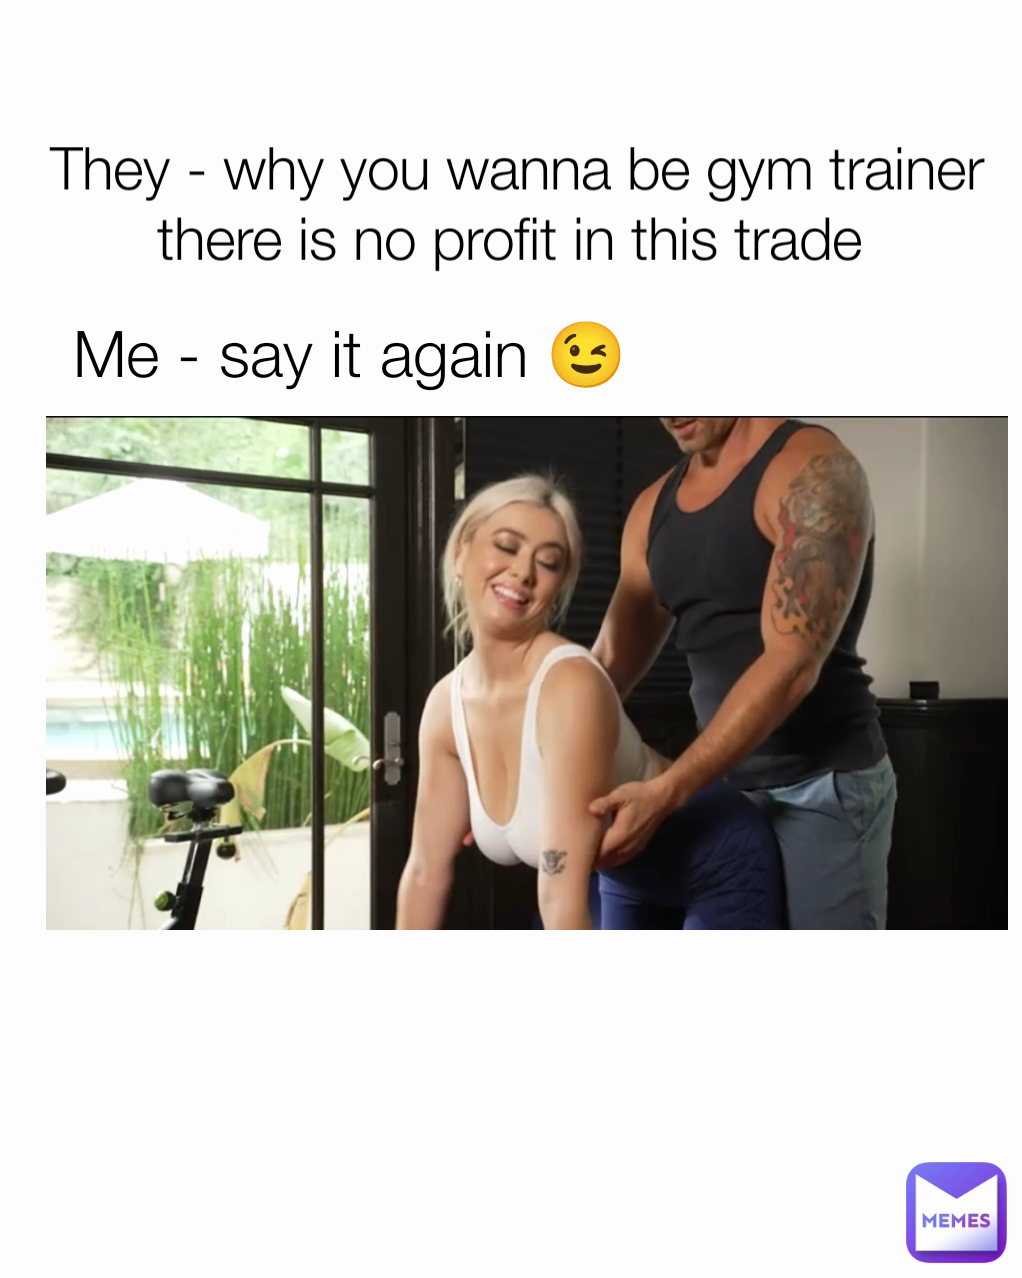 They - why you wanna be gym trainer there is no profit in this trade  Me - say it again 😉